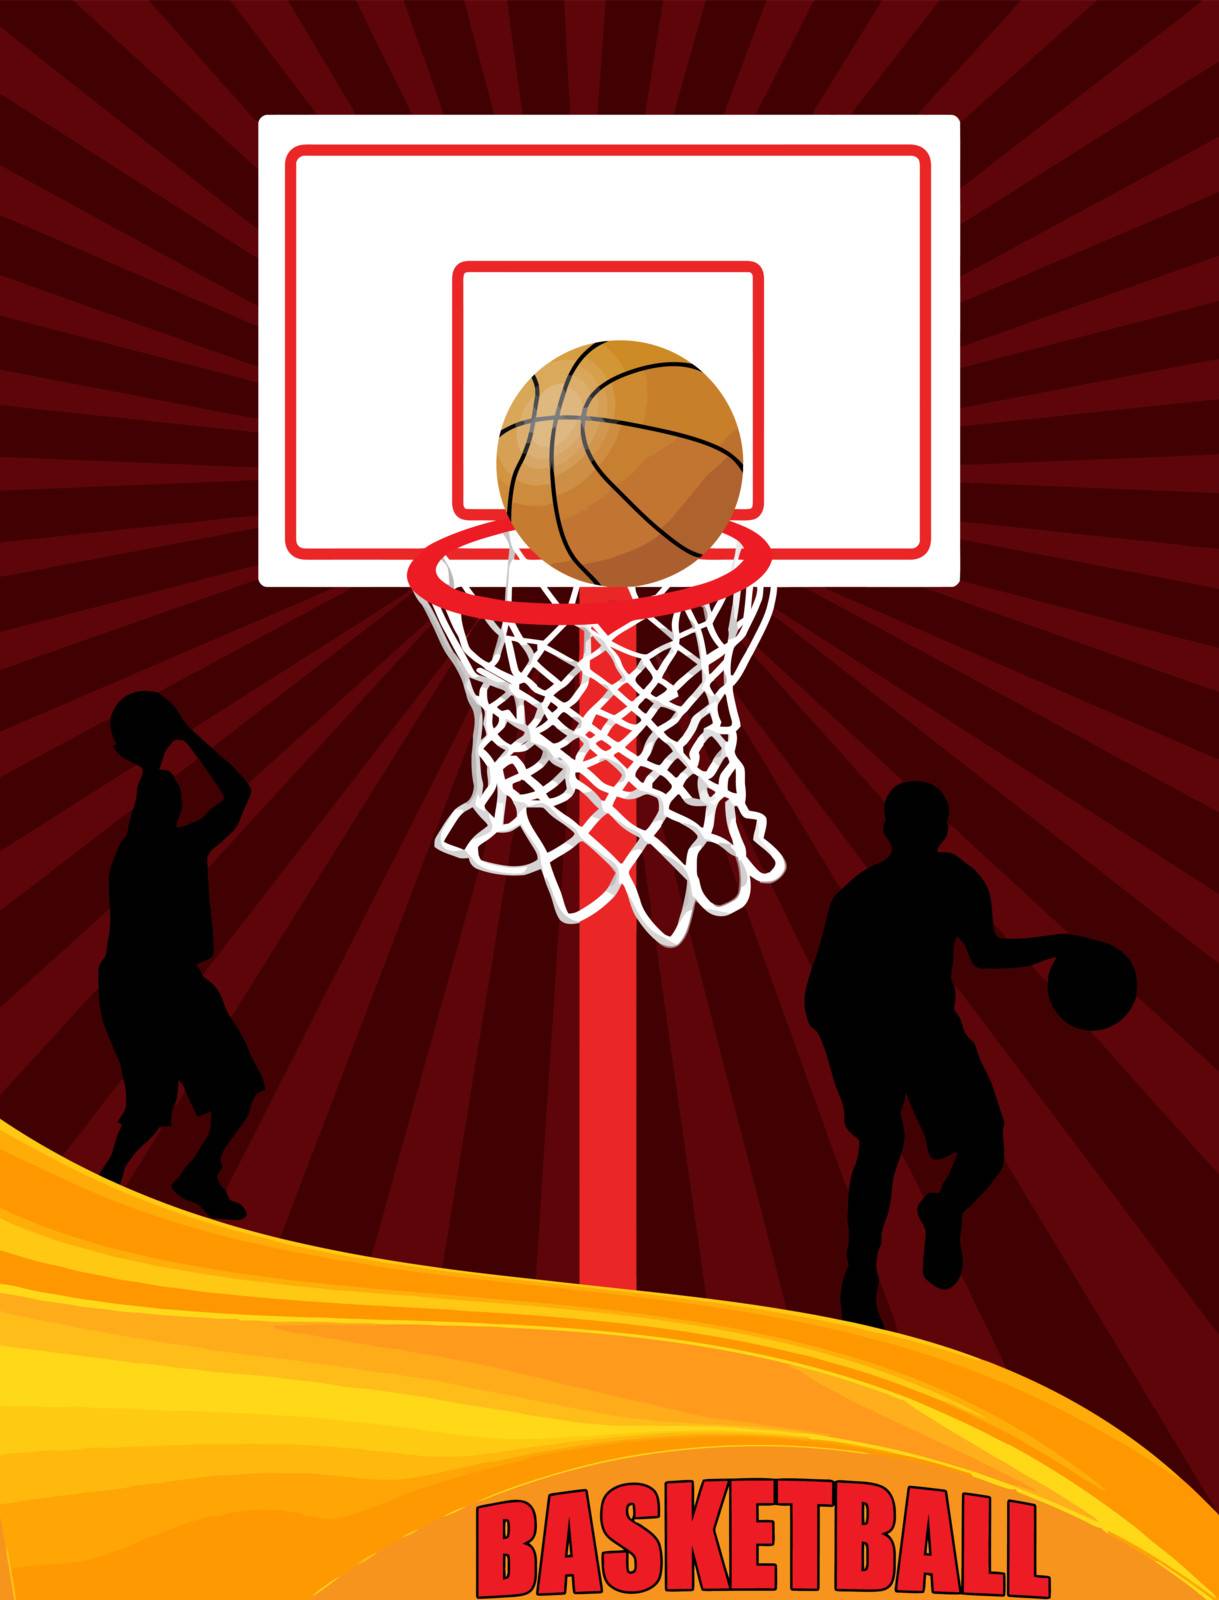 Basketball Advertising poster by roxanabalint